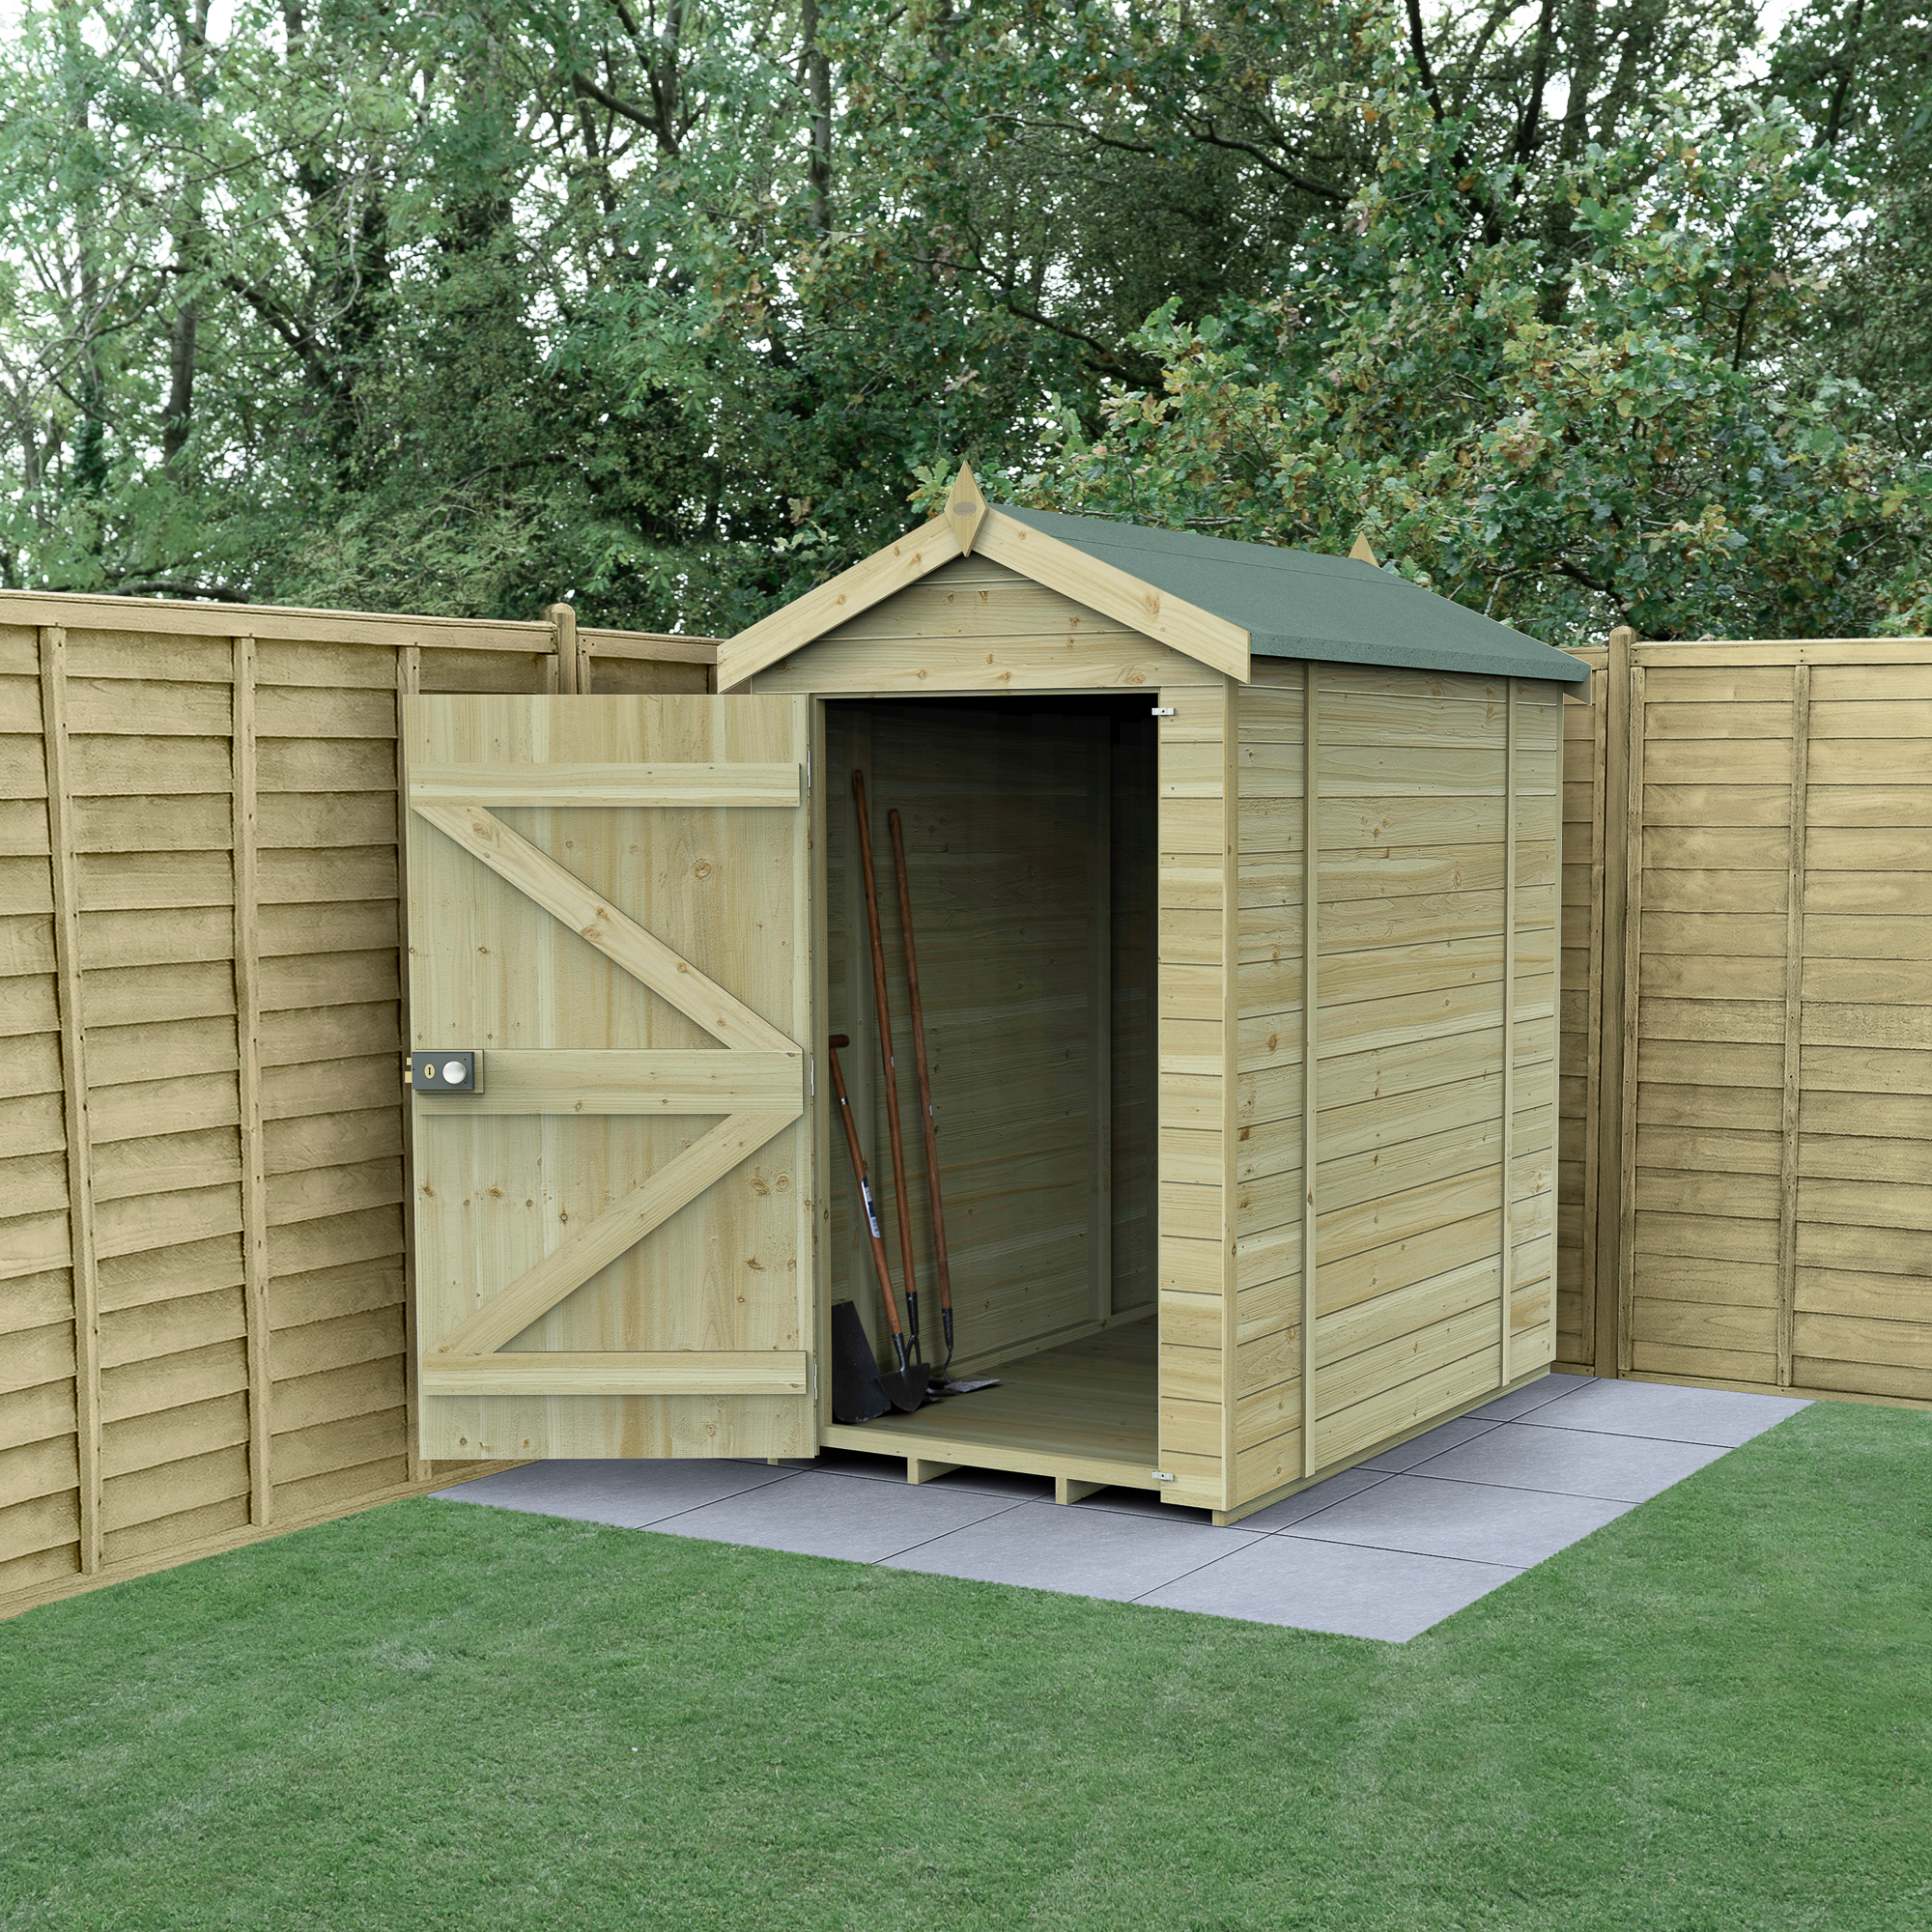 Forest Garden Timberdale 4 x 6ft Apex Tongue & Groove Pressure Treated Windowless Shed